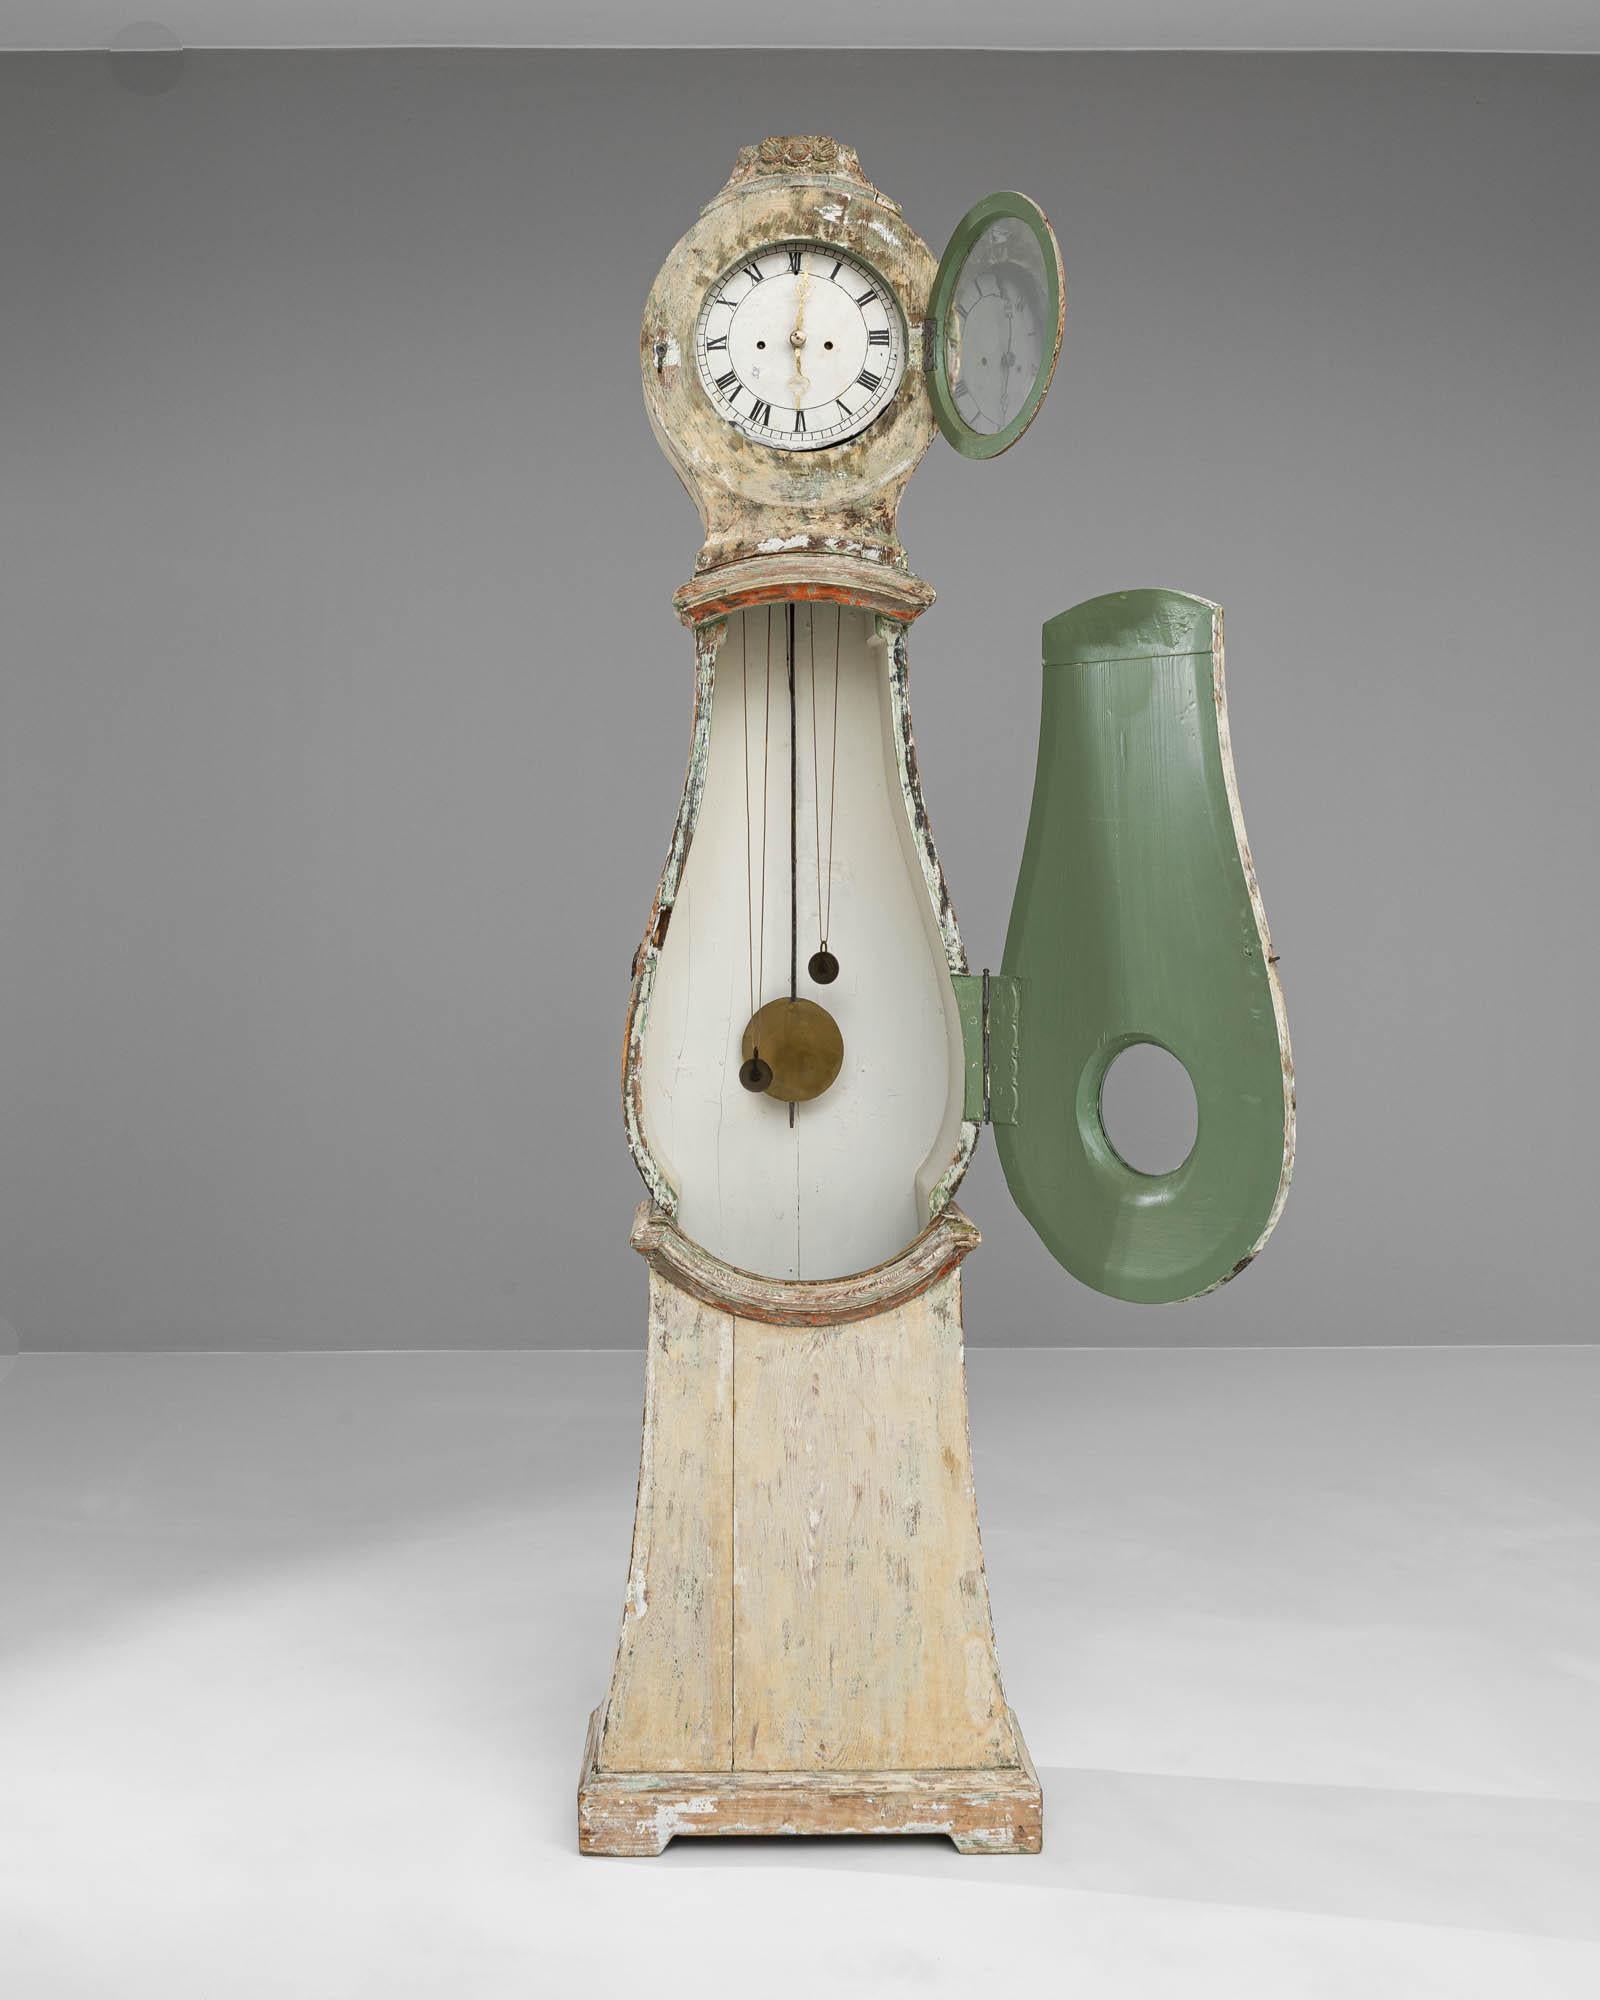 This early 19th Century Swedish wooden floor clock stands as an enduring icon of antique elegance and craftsmanship. The clock boasts a body painted in a delicate, faded hue, reminiscent of the patina that gracefully forms over time, giving it a